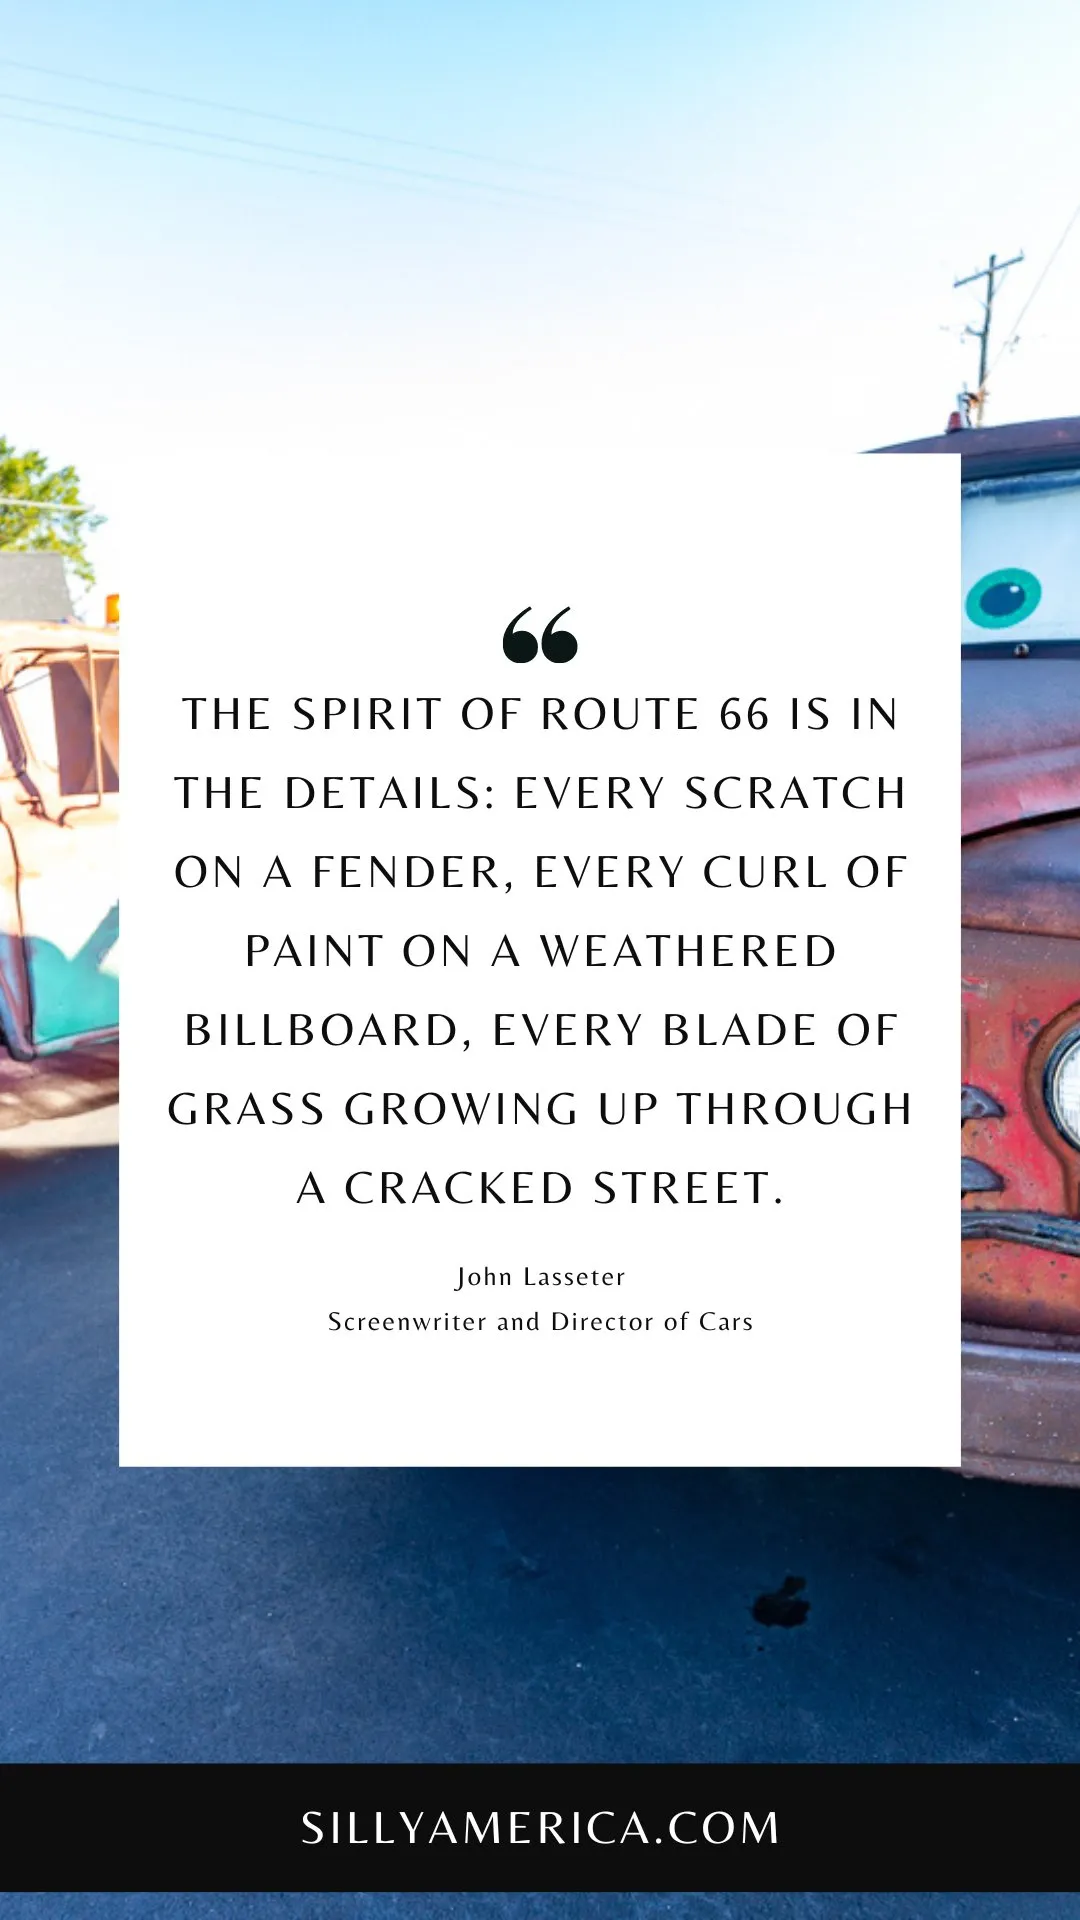 Route 66 Quotes, Sayings, and Phrases -  The spirit of Route 66 is in the details: every scratch on a fender, every curl of paint on a weathered billboard, every blade of grass growing up through a cracked street. - John Lasseter, Screenwriter and Director of Cars